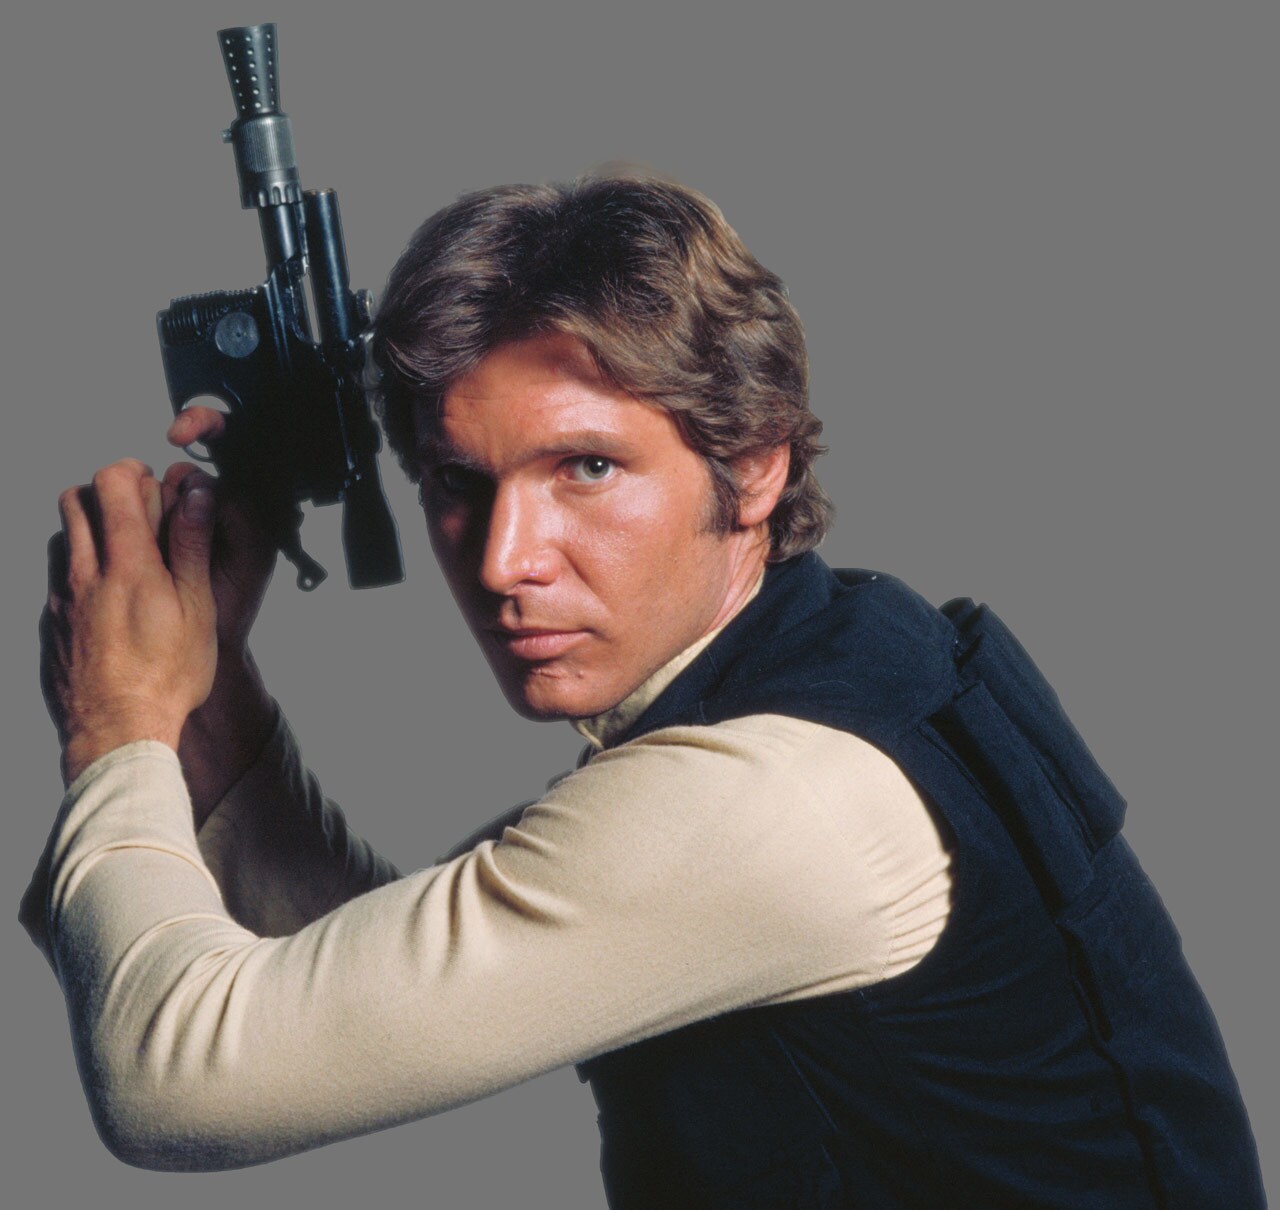 Harrison Ford as Han Solo holds a blaster pistol with both hands in a publicity photo for A New Hope.